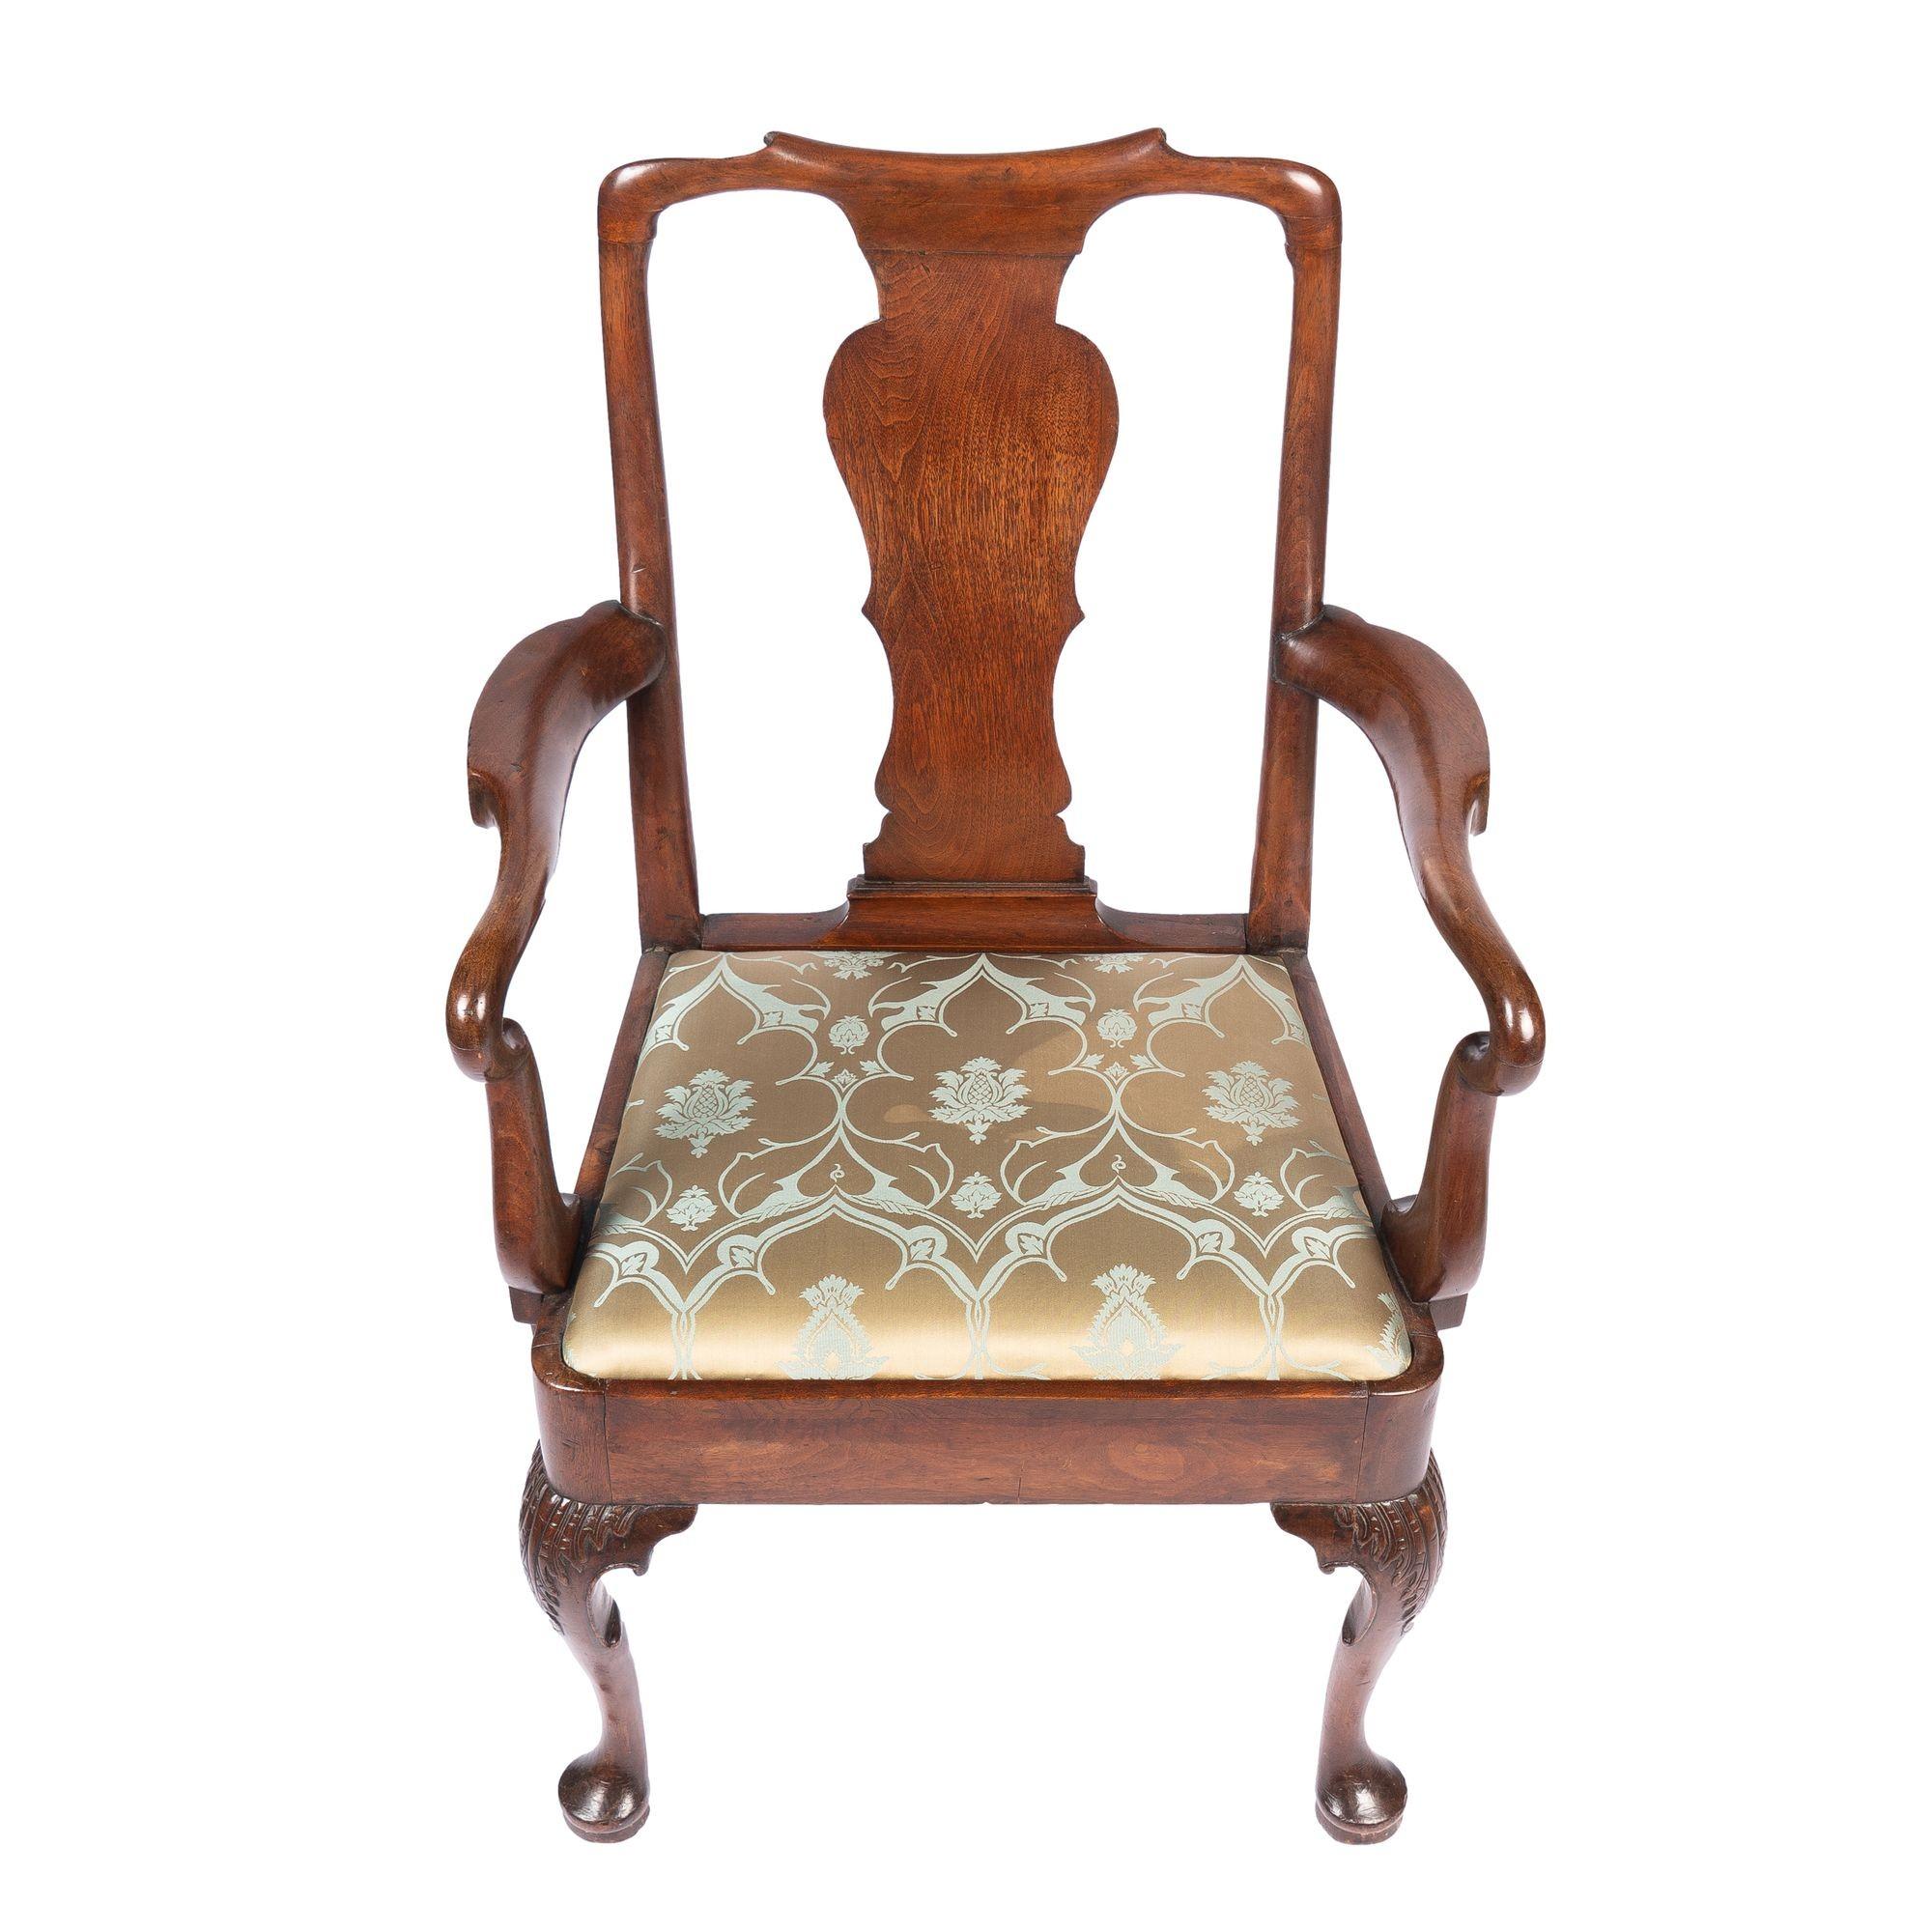 English Georgian Mahogany Armchair with Upholstered Slip Seat, c. 1720 For Sale 3